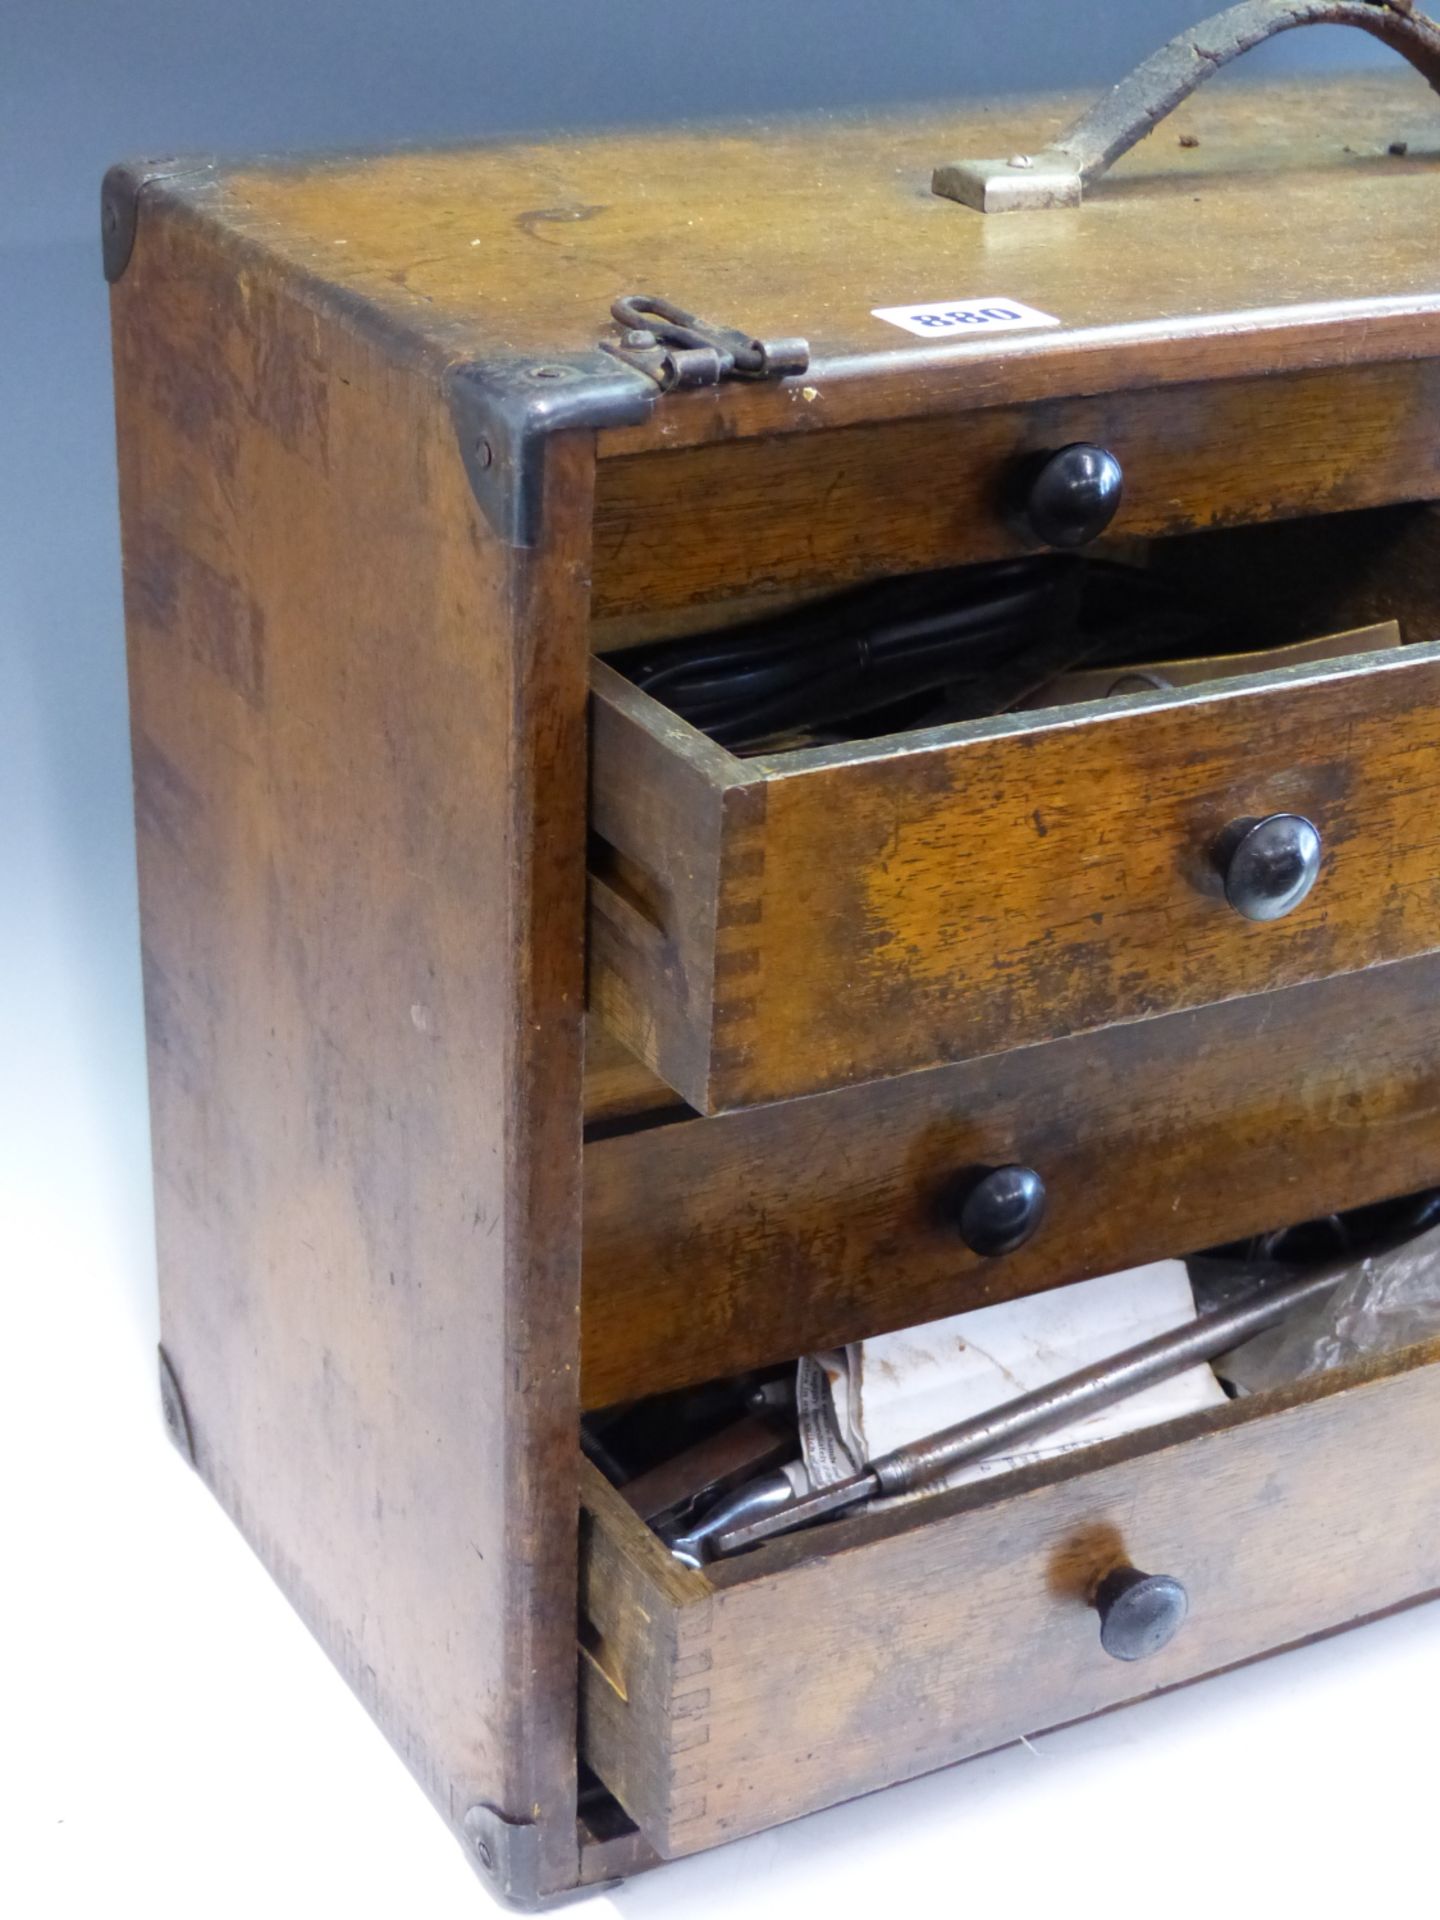 A VINTAGE WOODEN TOOL CHEST OF MULTIPLE DRAWERS, SOME CONTAINING MILLING AND OTHER TOOLS. - Image 2 of 6